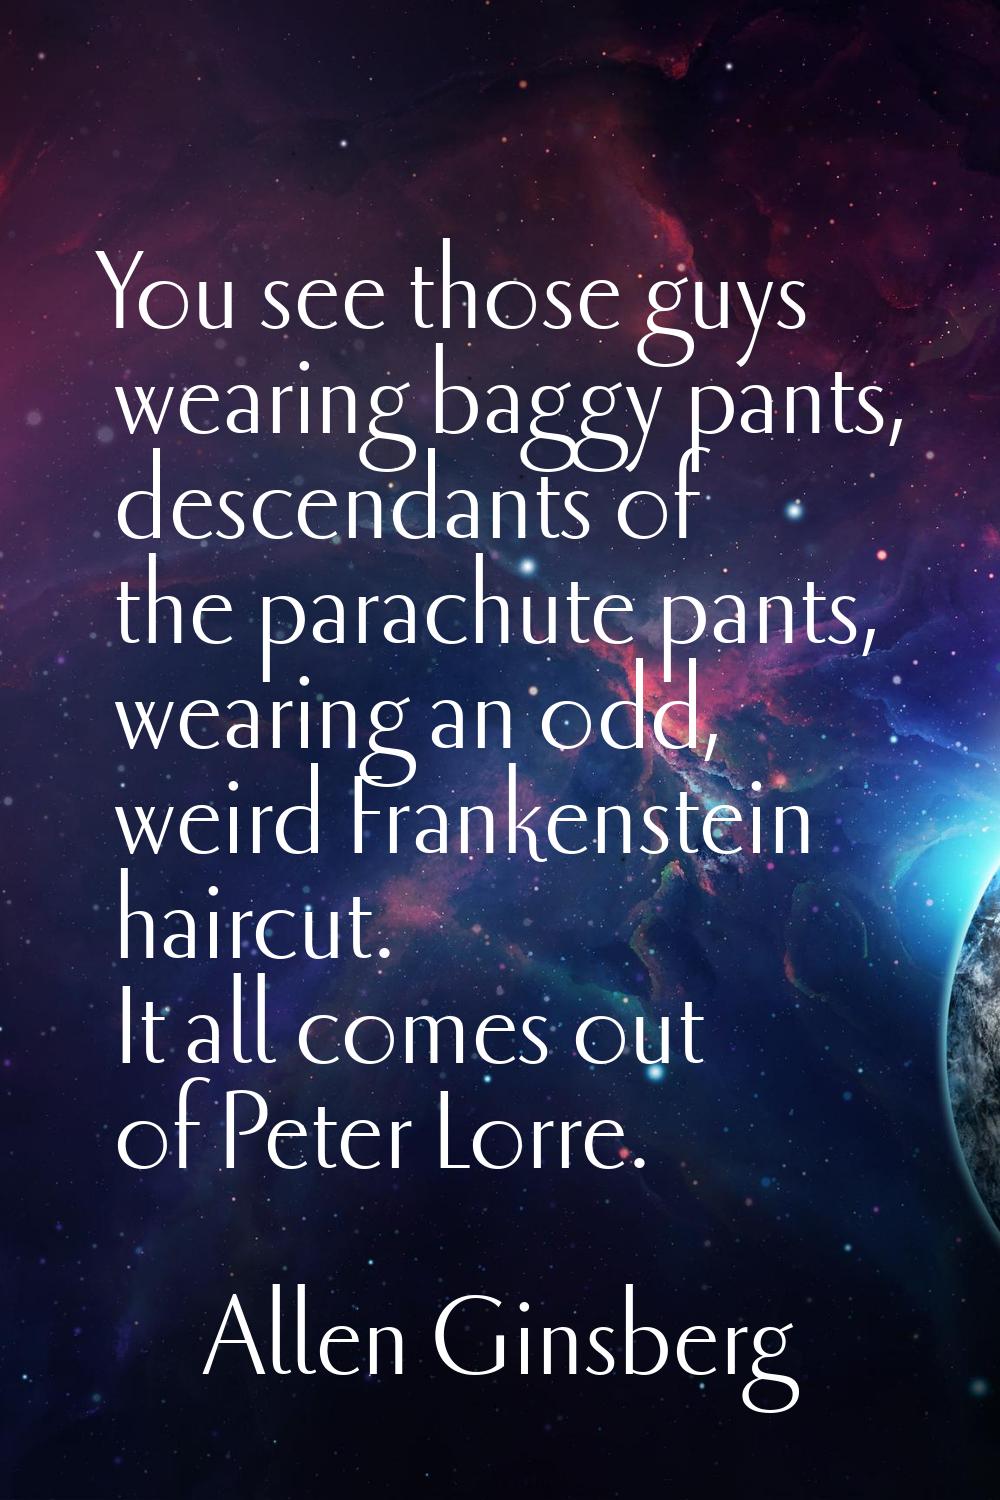 You see those guys wearing baggy pants, descendants of the parachute pants, wearing an odd, weird F